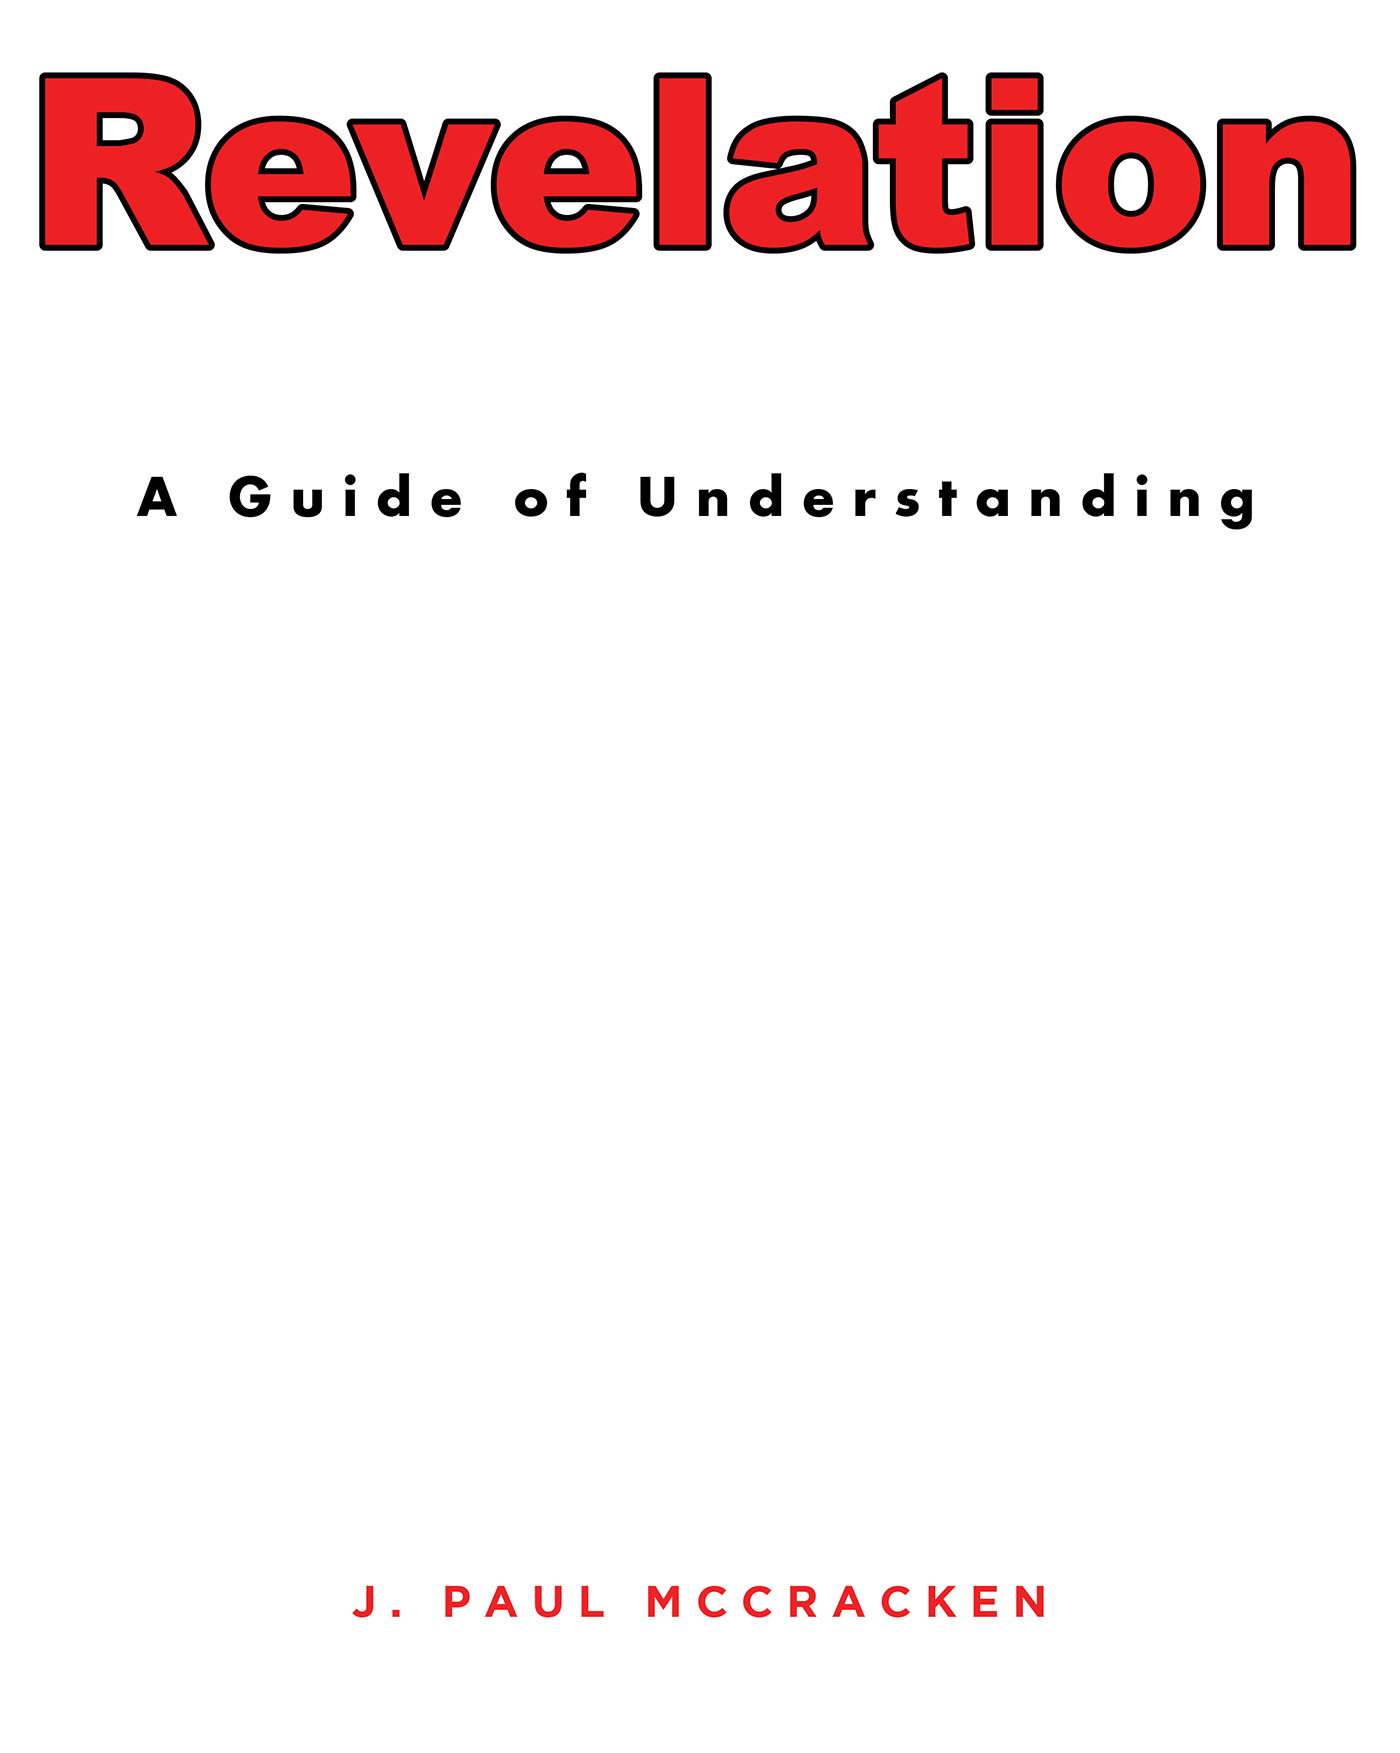 J. Paul Mccracken’s Newly Released "Revelation: A Guide of Understanding" is a Careful Presentation of an Often-Misunderstood Book of the Bible